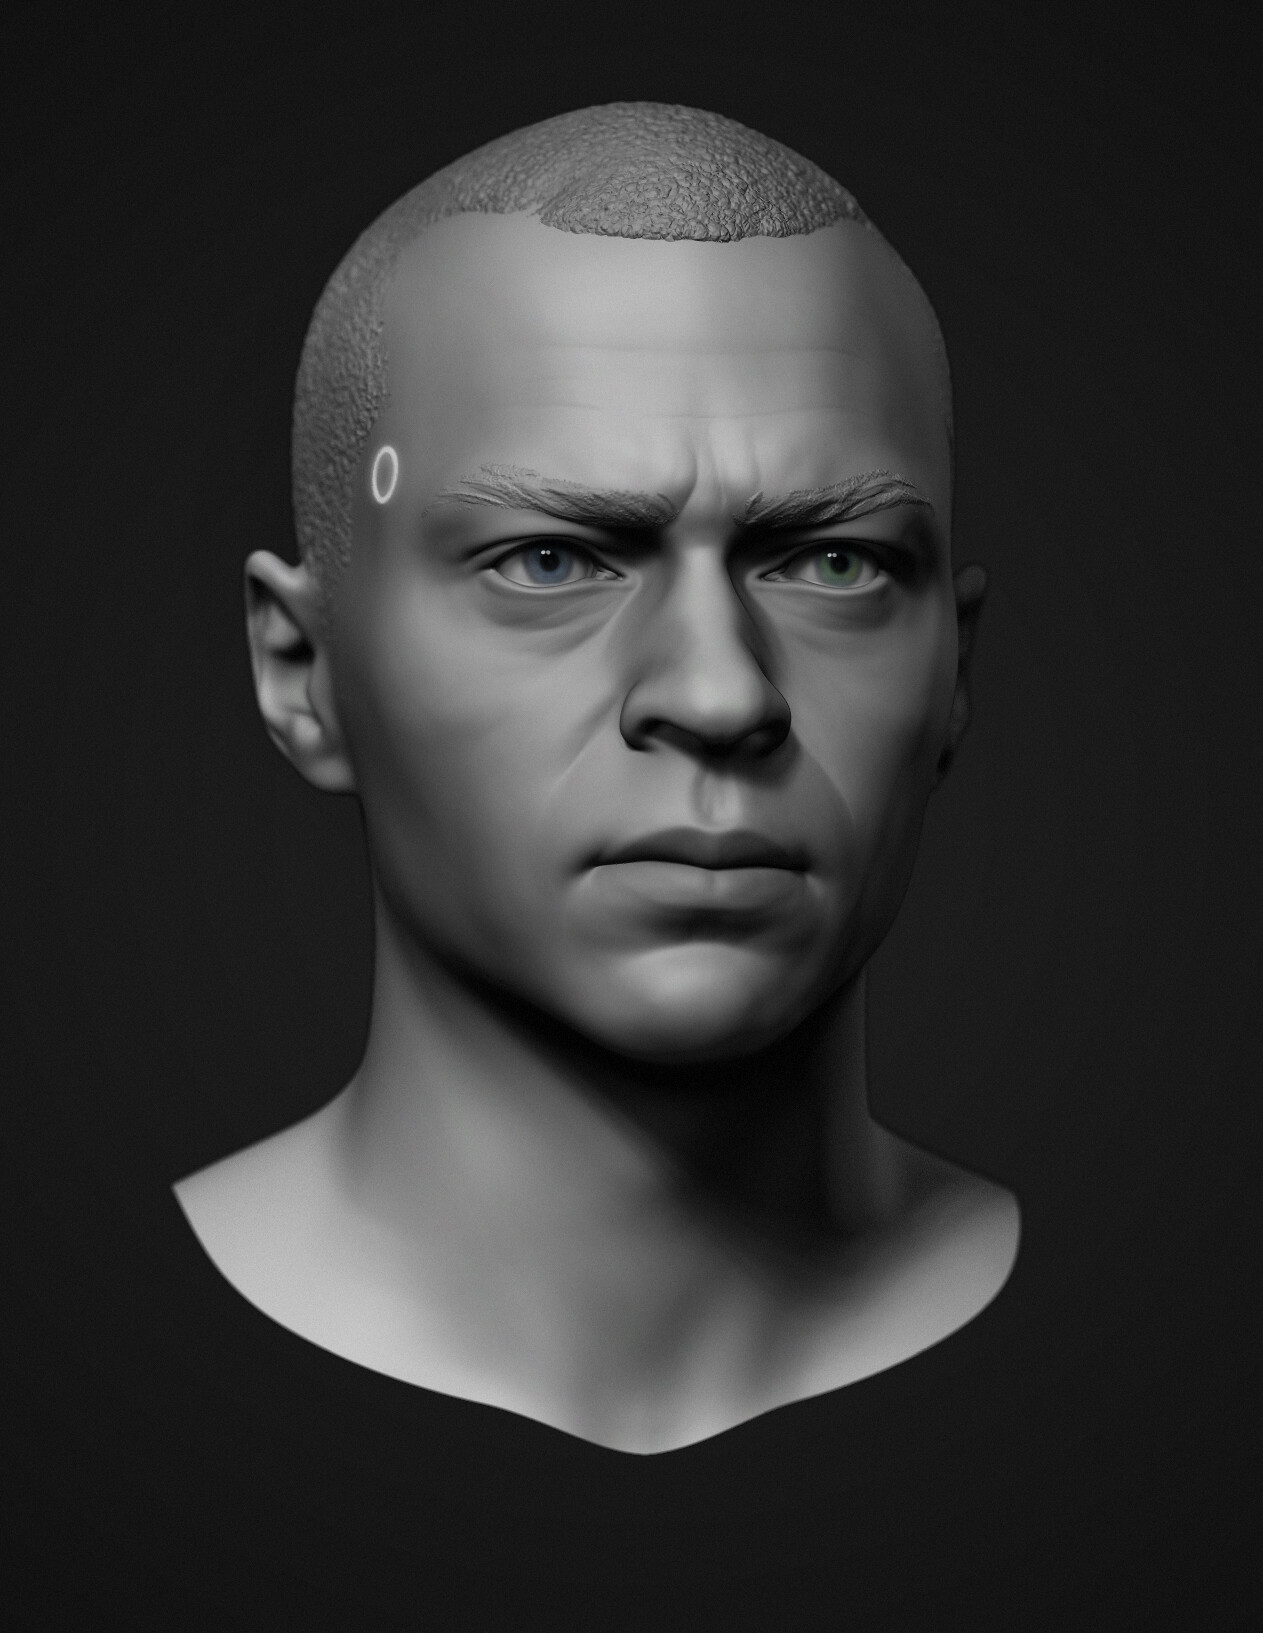 A model I did recently for a client, Markus head from Detroit become human ...